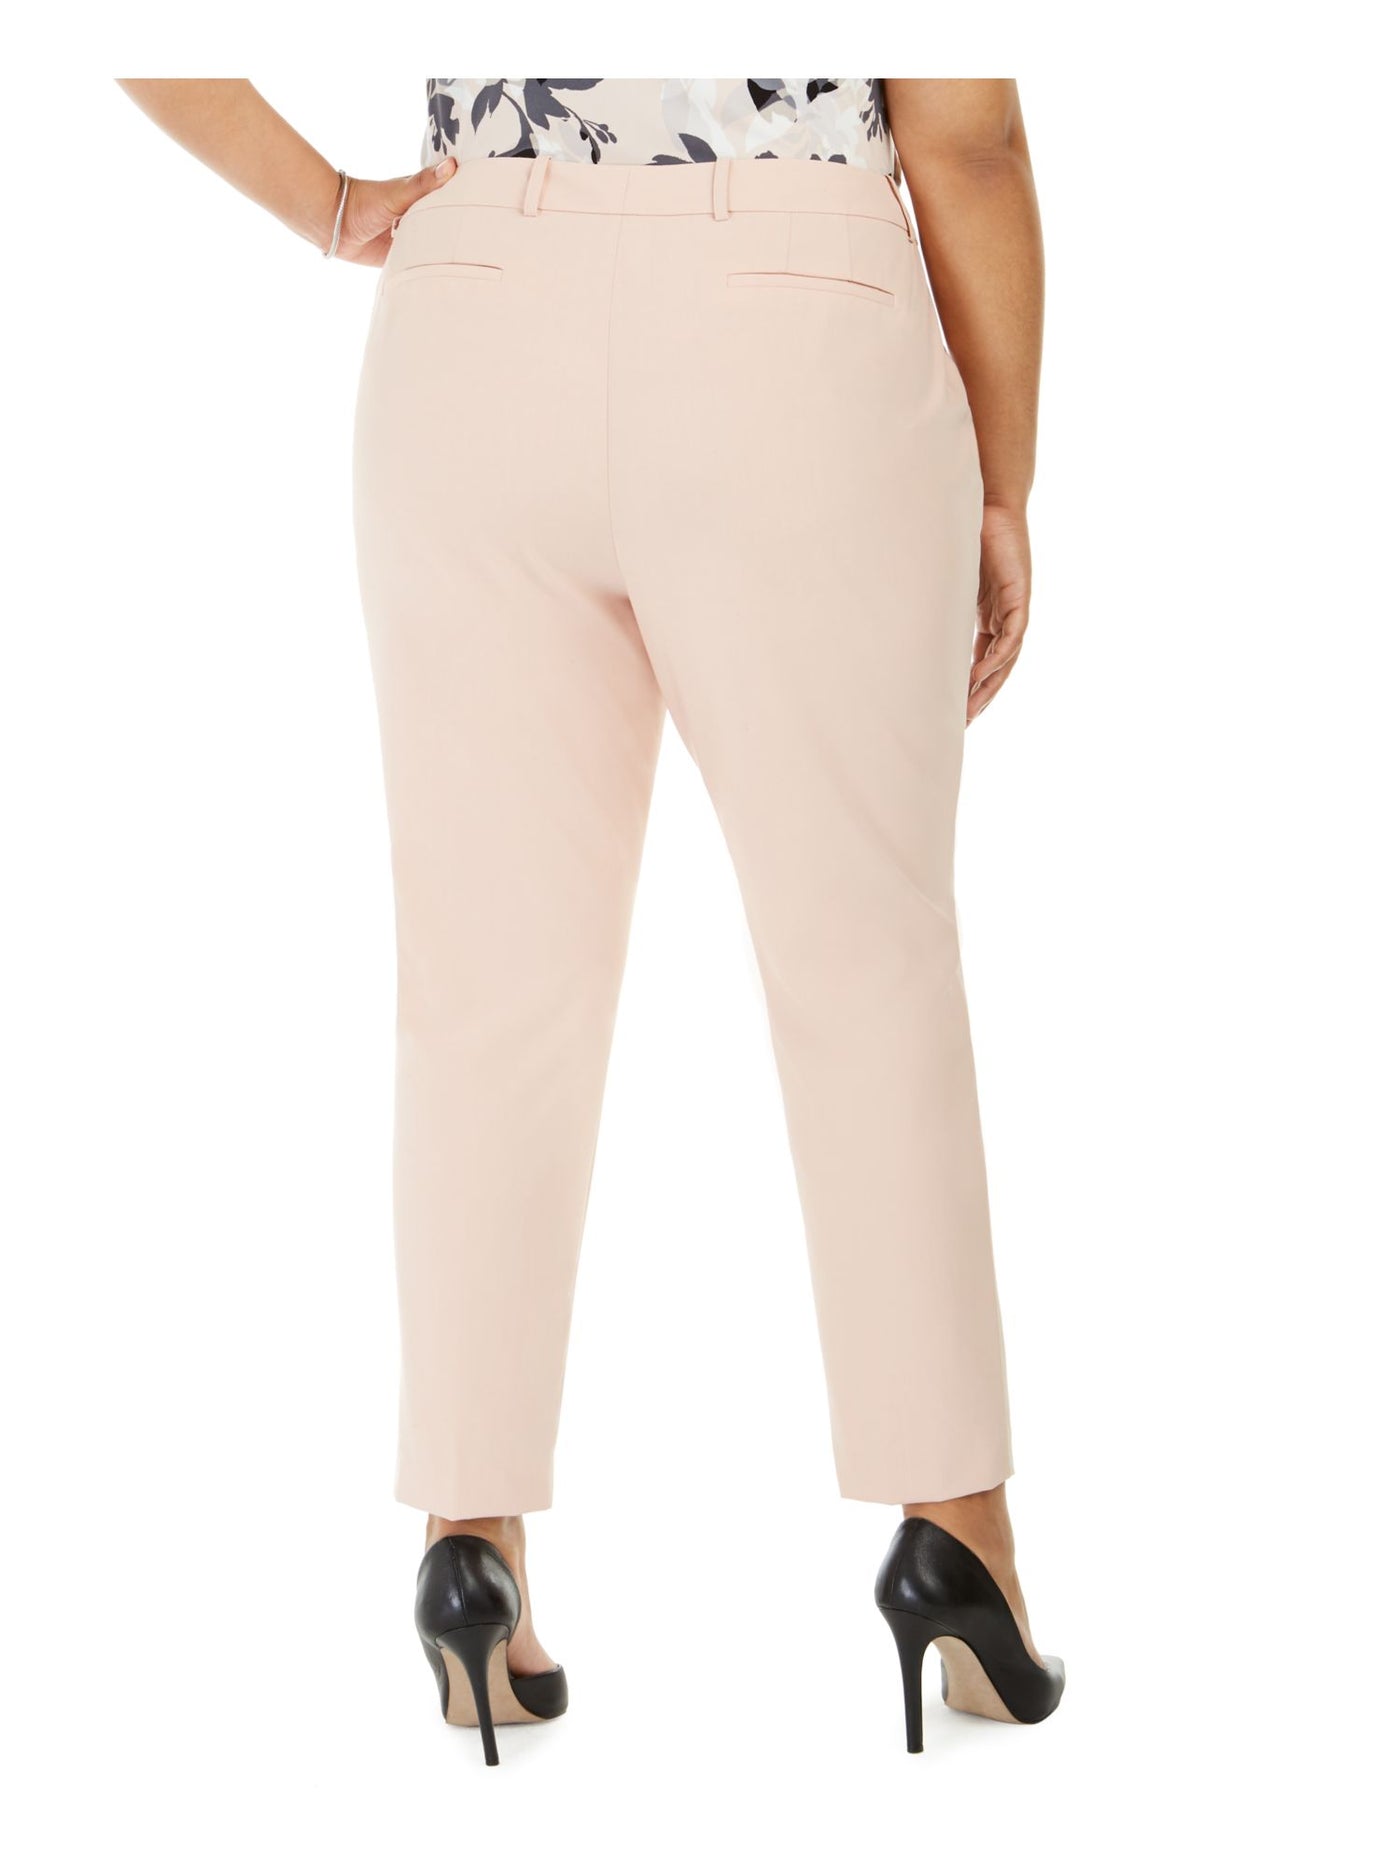 CALVIN KLEIN Womens Pink Stretch Zippered Pocketed Wear To Work Straight leg Pants Plus 18W